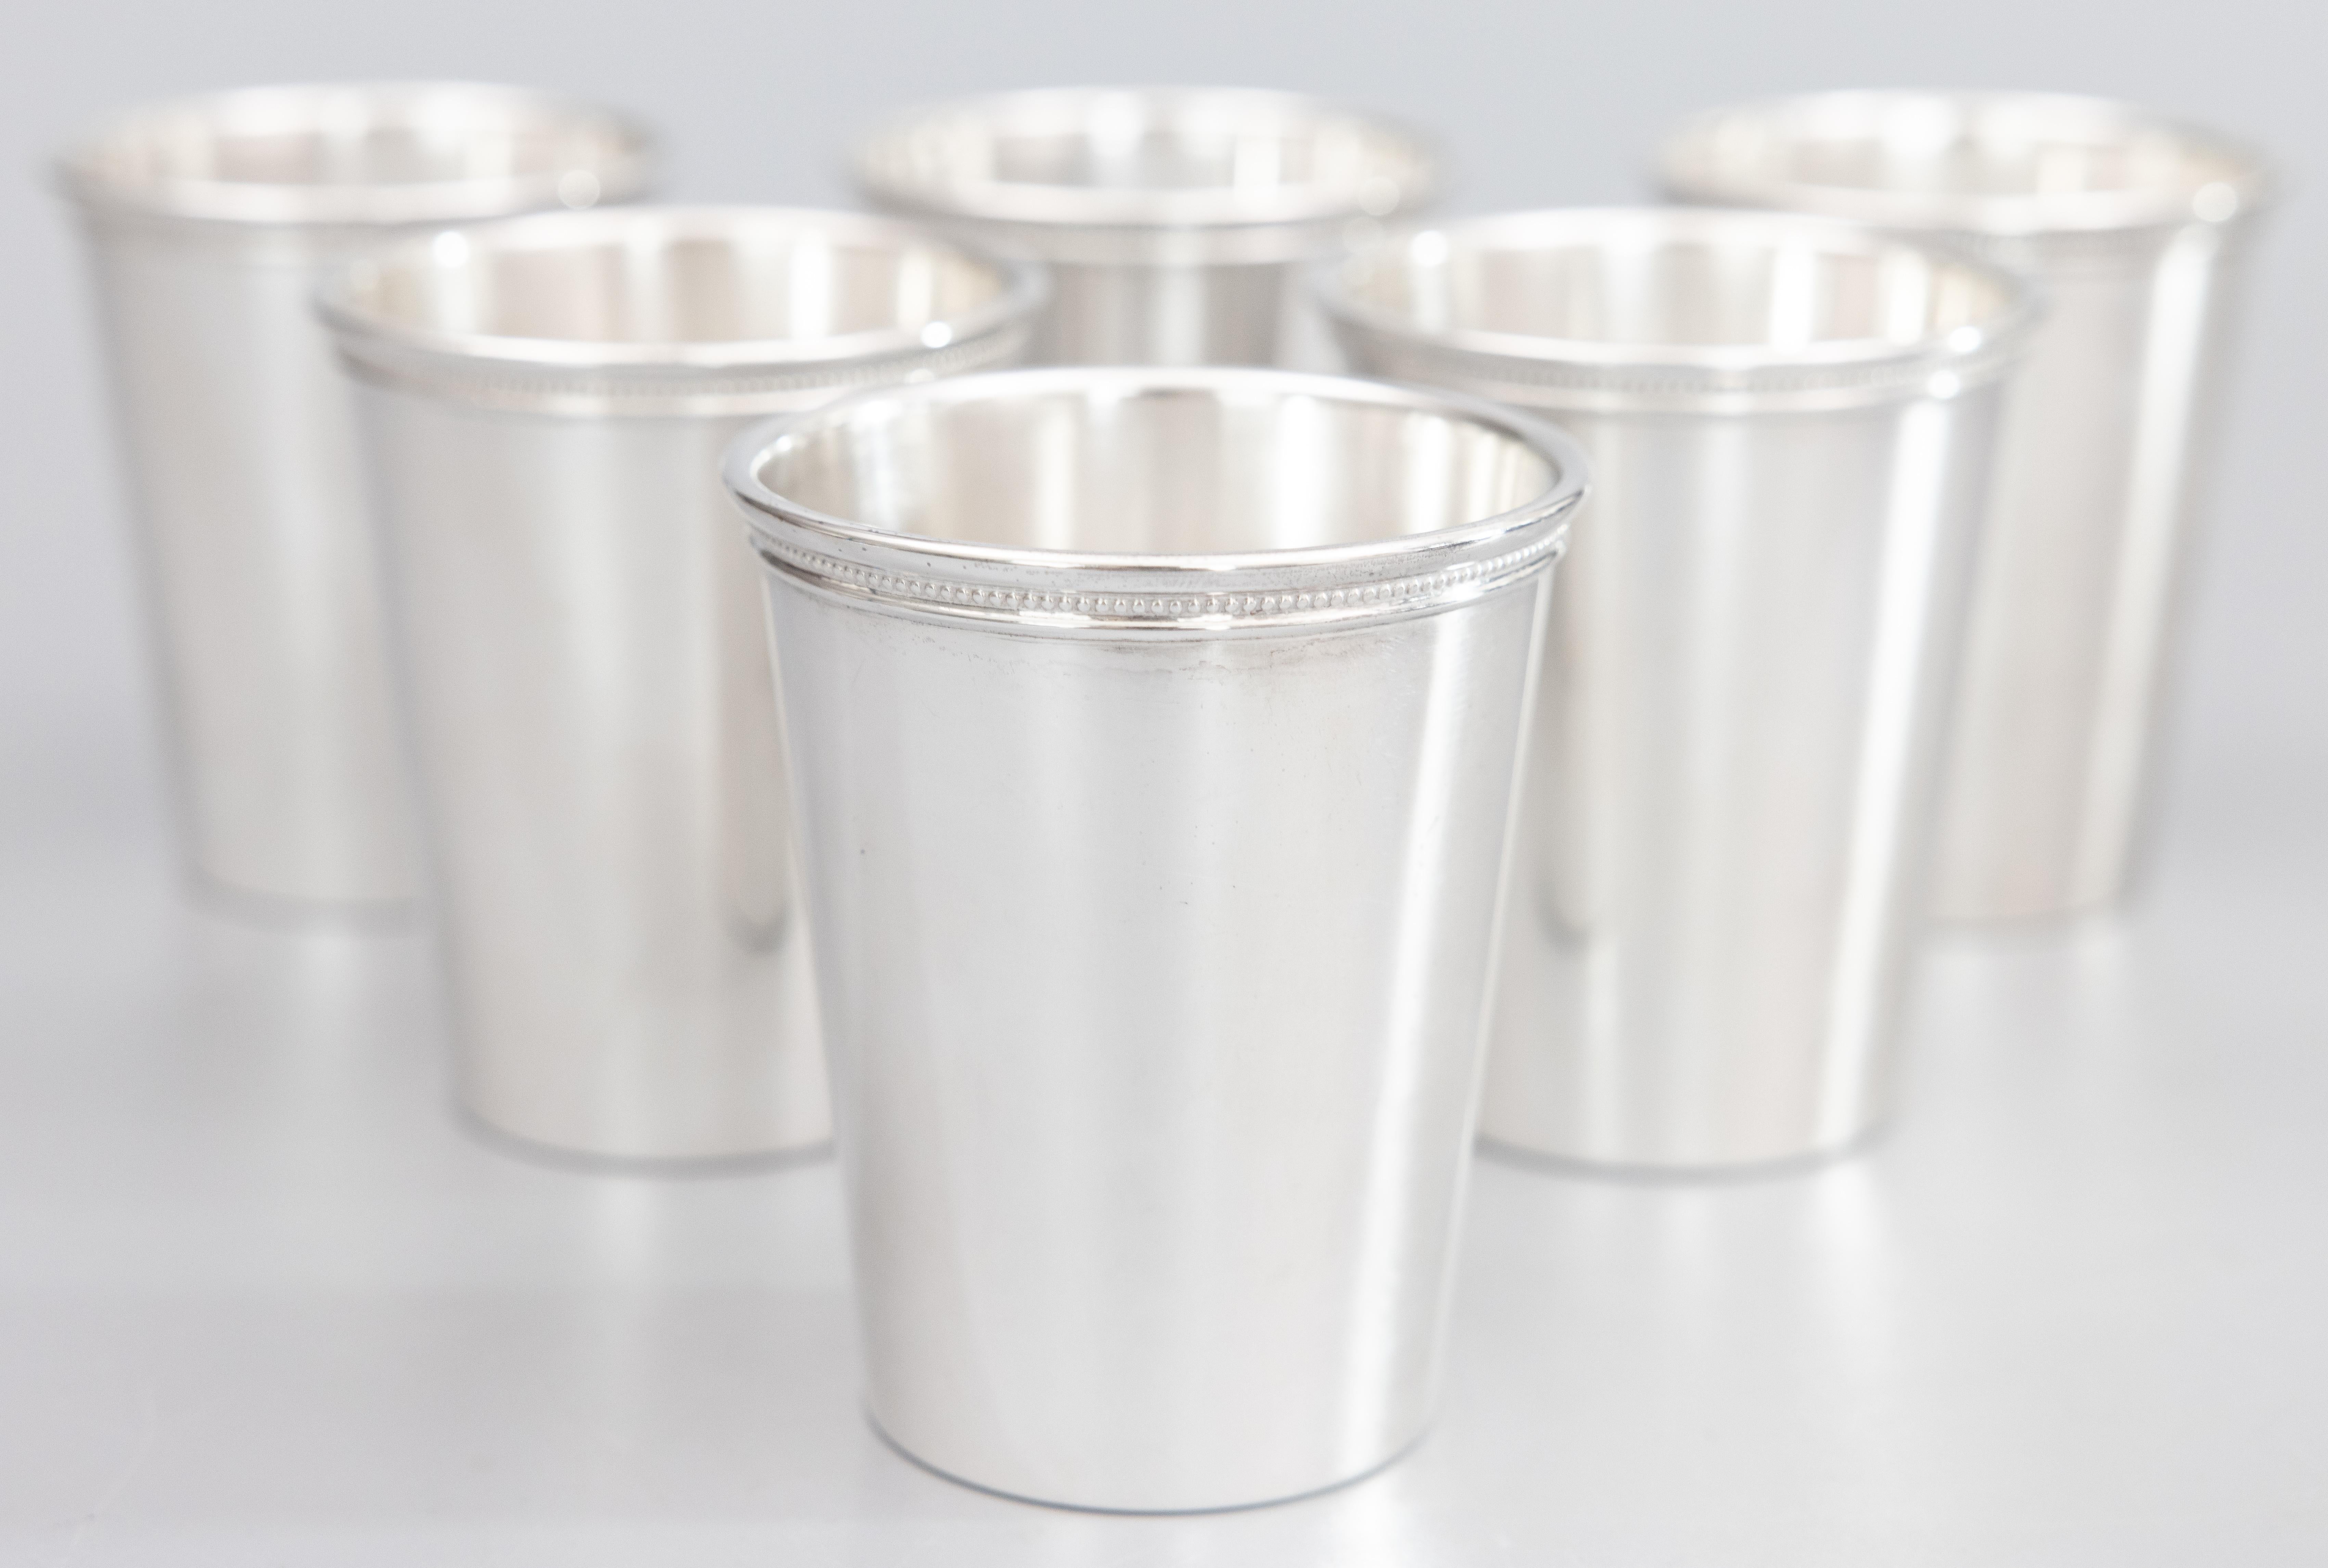 A superb Mid Century set of 6 silverplate mint julep tumblers by Wm Rogers. Marked on reverse. These fine cups are heavy and well made with a sleek design and decorative beaded detail around the rim. They would be a stylish addition to your barware